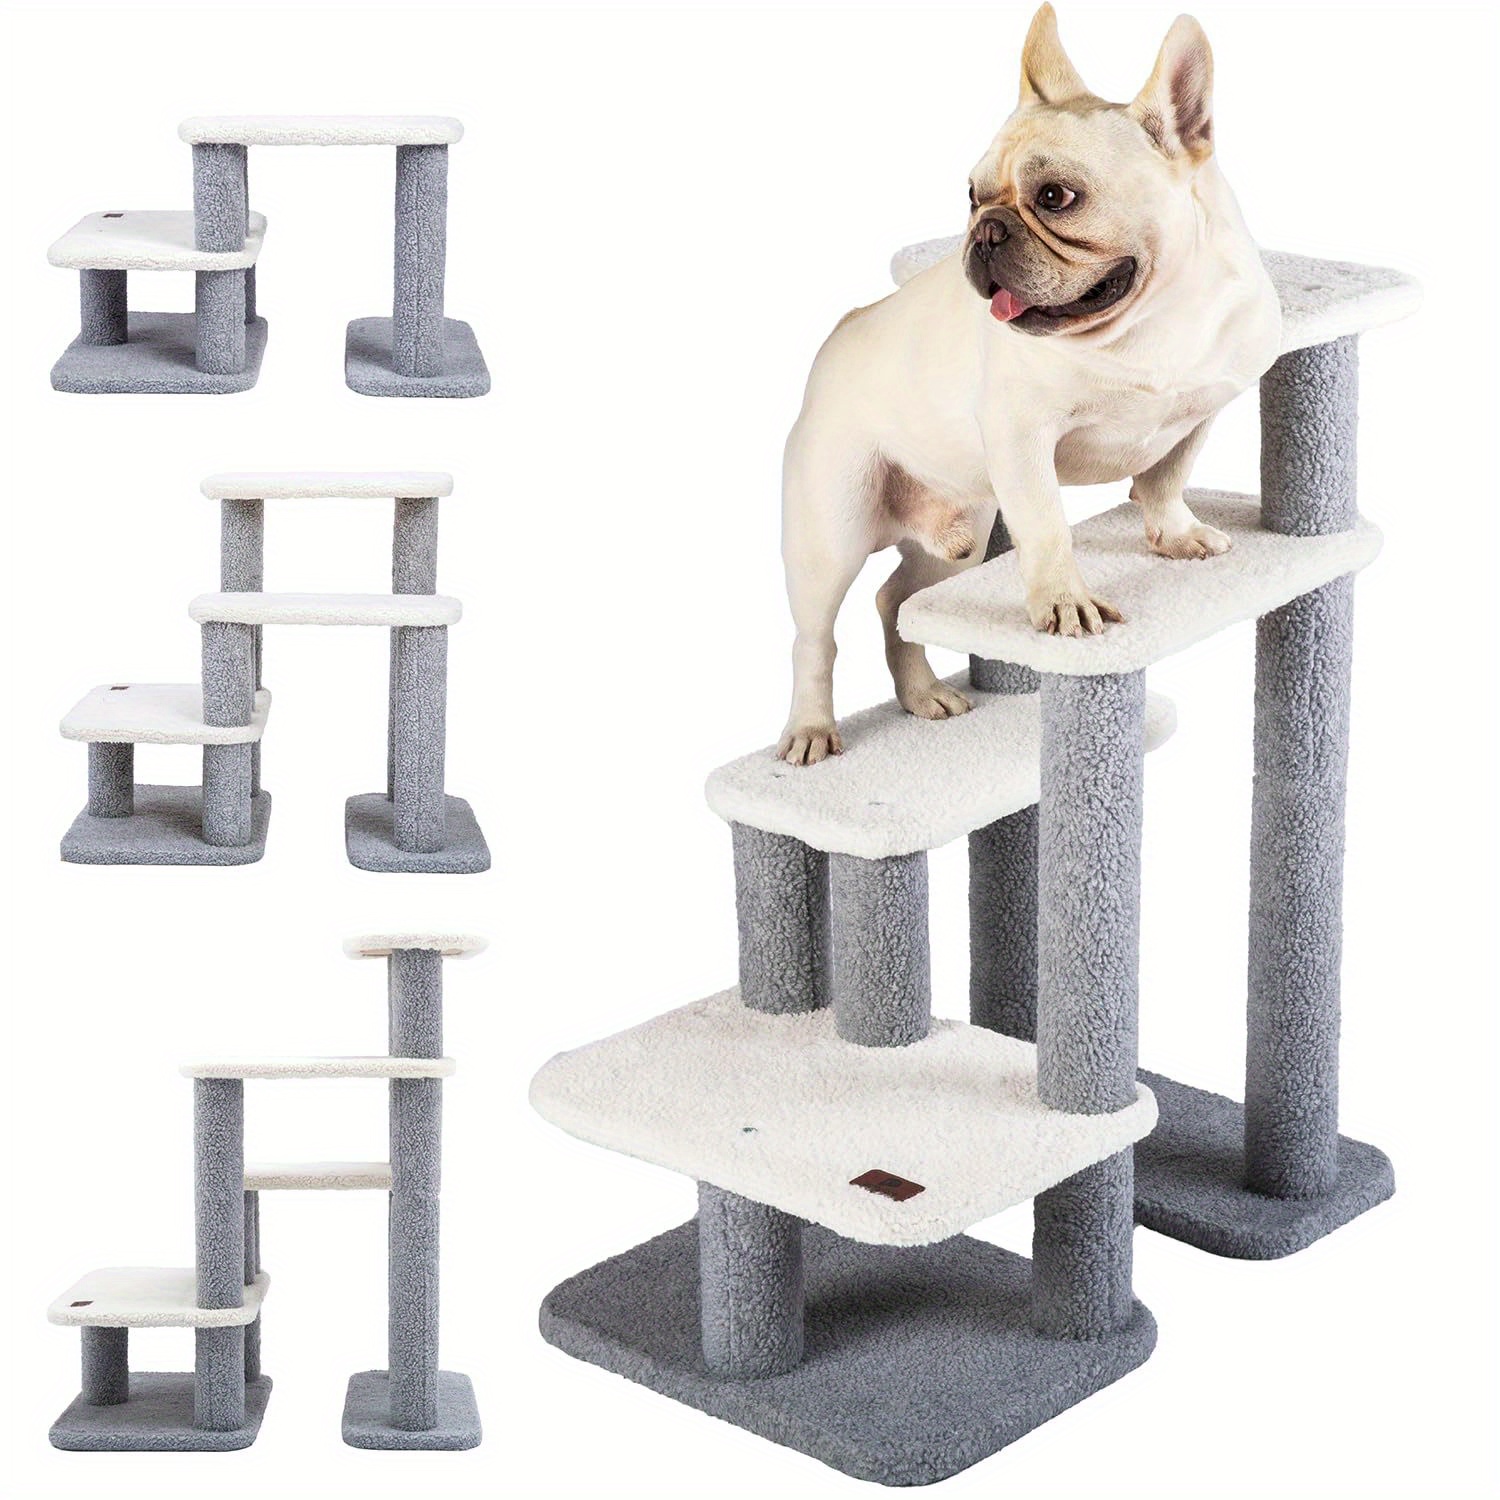 

Pet Stairs For Small Dogs - Cat Scratching Post Pet Steps For High Beds And Couch, High-strength Boards Covered In Natural Sisal Rope For Kittens Dogs Climbing Playing, 3 Combination Options